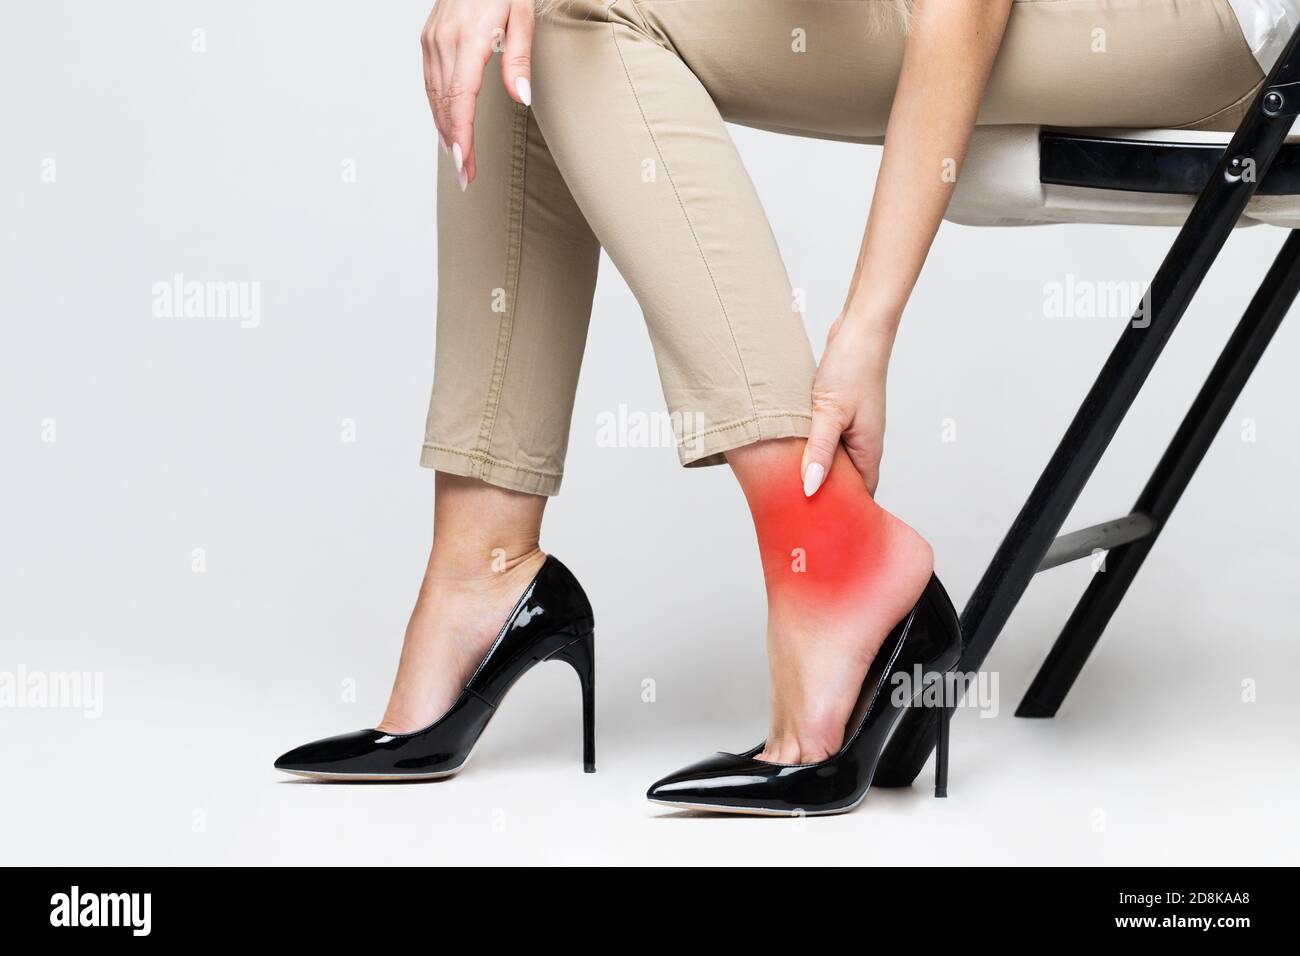 Tired woman touching her ankle, suffering from leg pain because of uncomfortable shoes, feet pain wear high heel shoes. Syndrome of office work. Swell Stock Photo